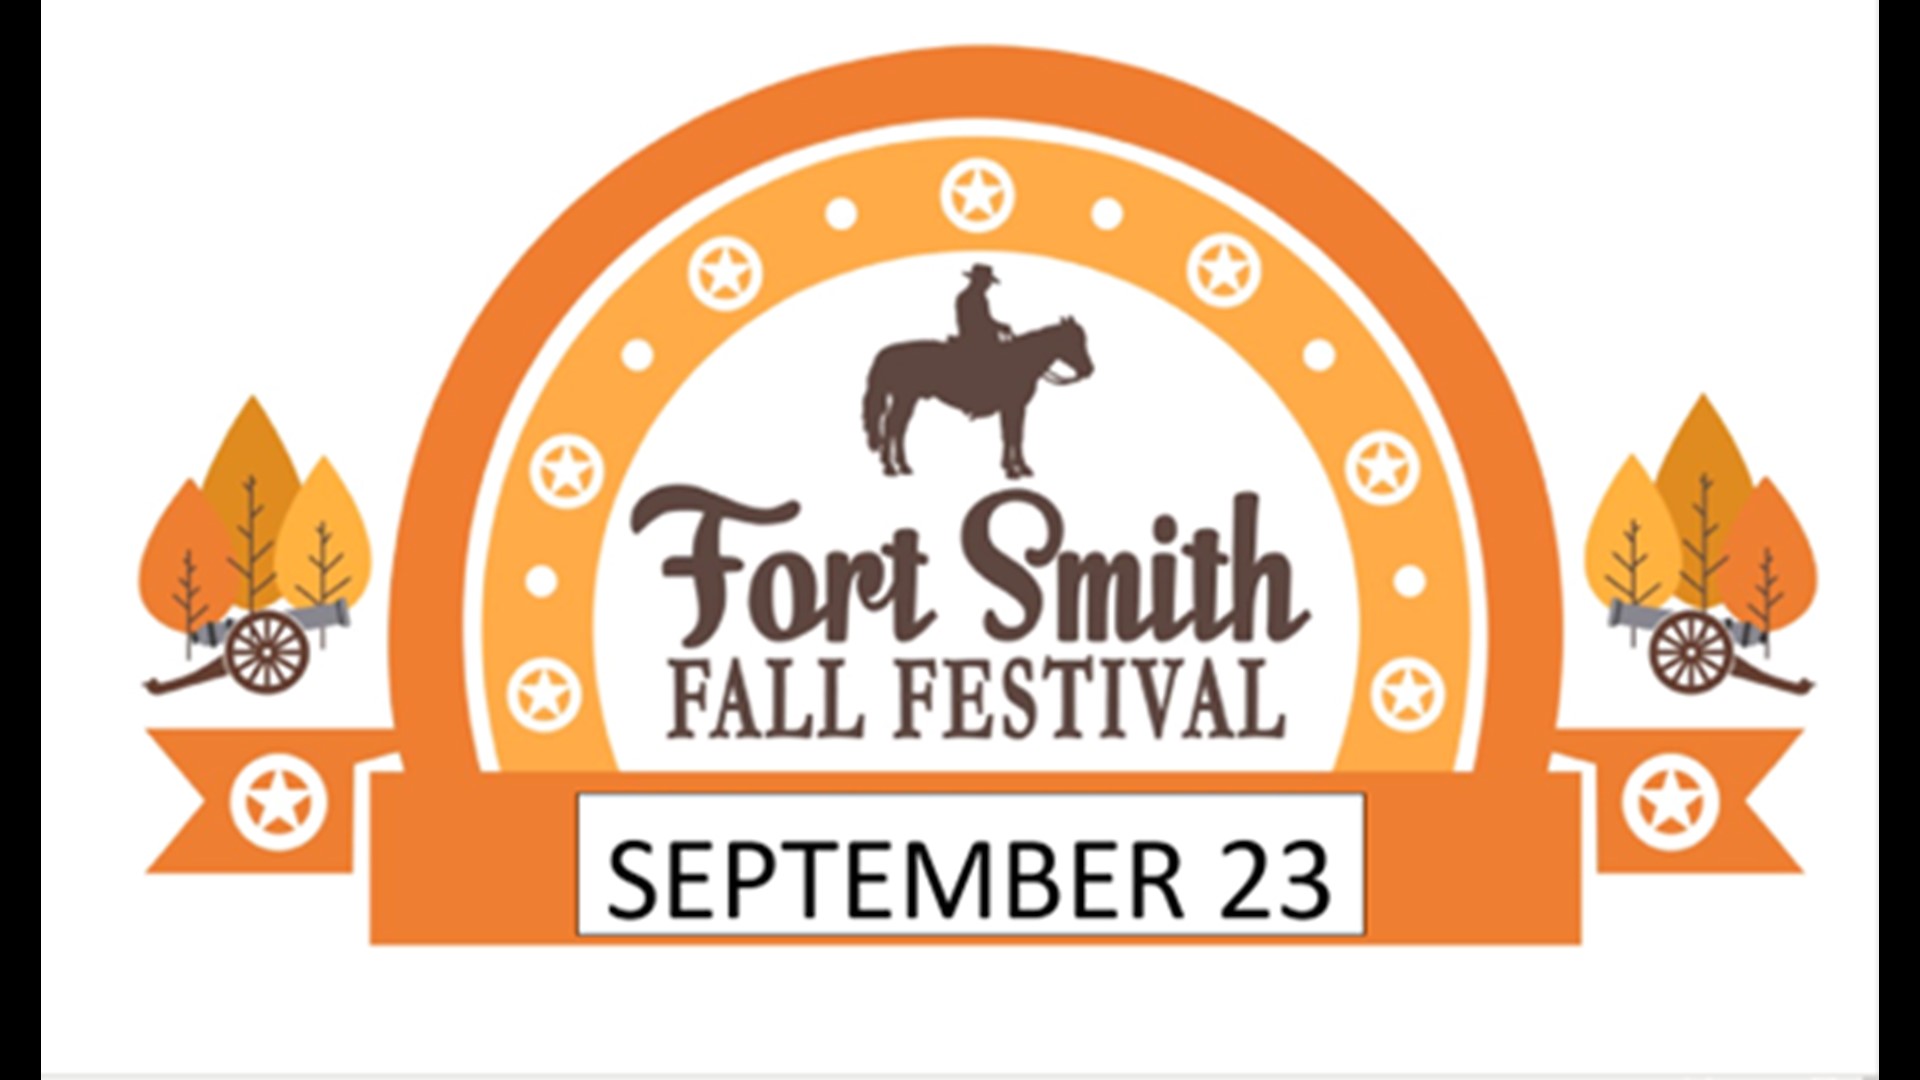 The Festival will offer up things to do in all of downtown Fort Smith on September 23rd.  Daren finds out more about what you can expect.